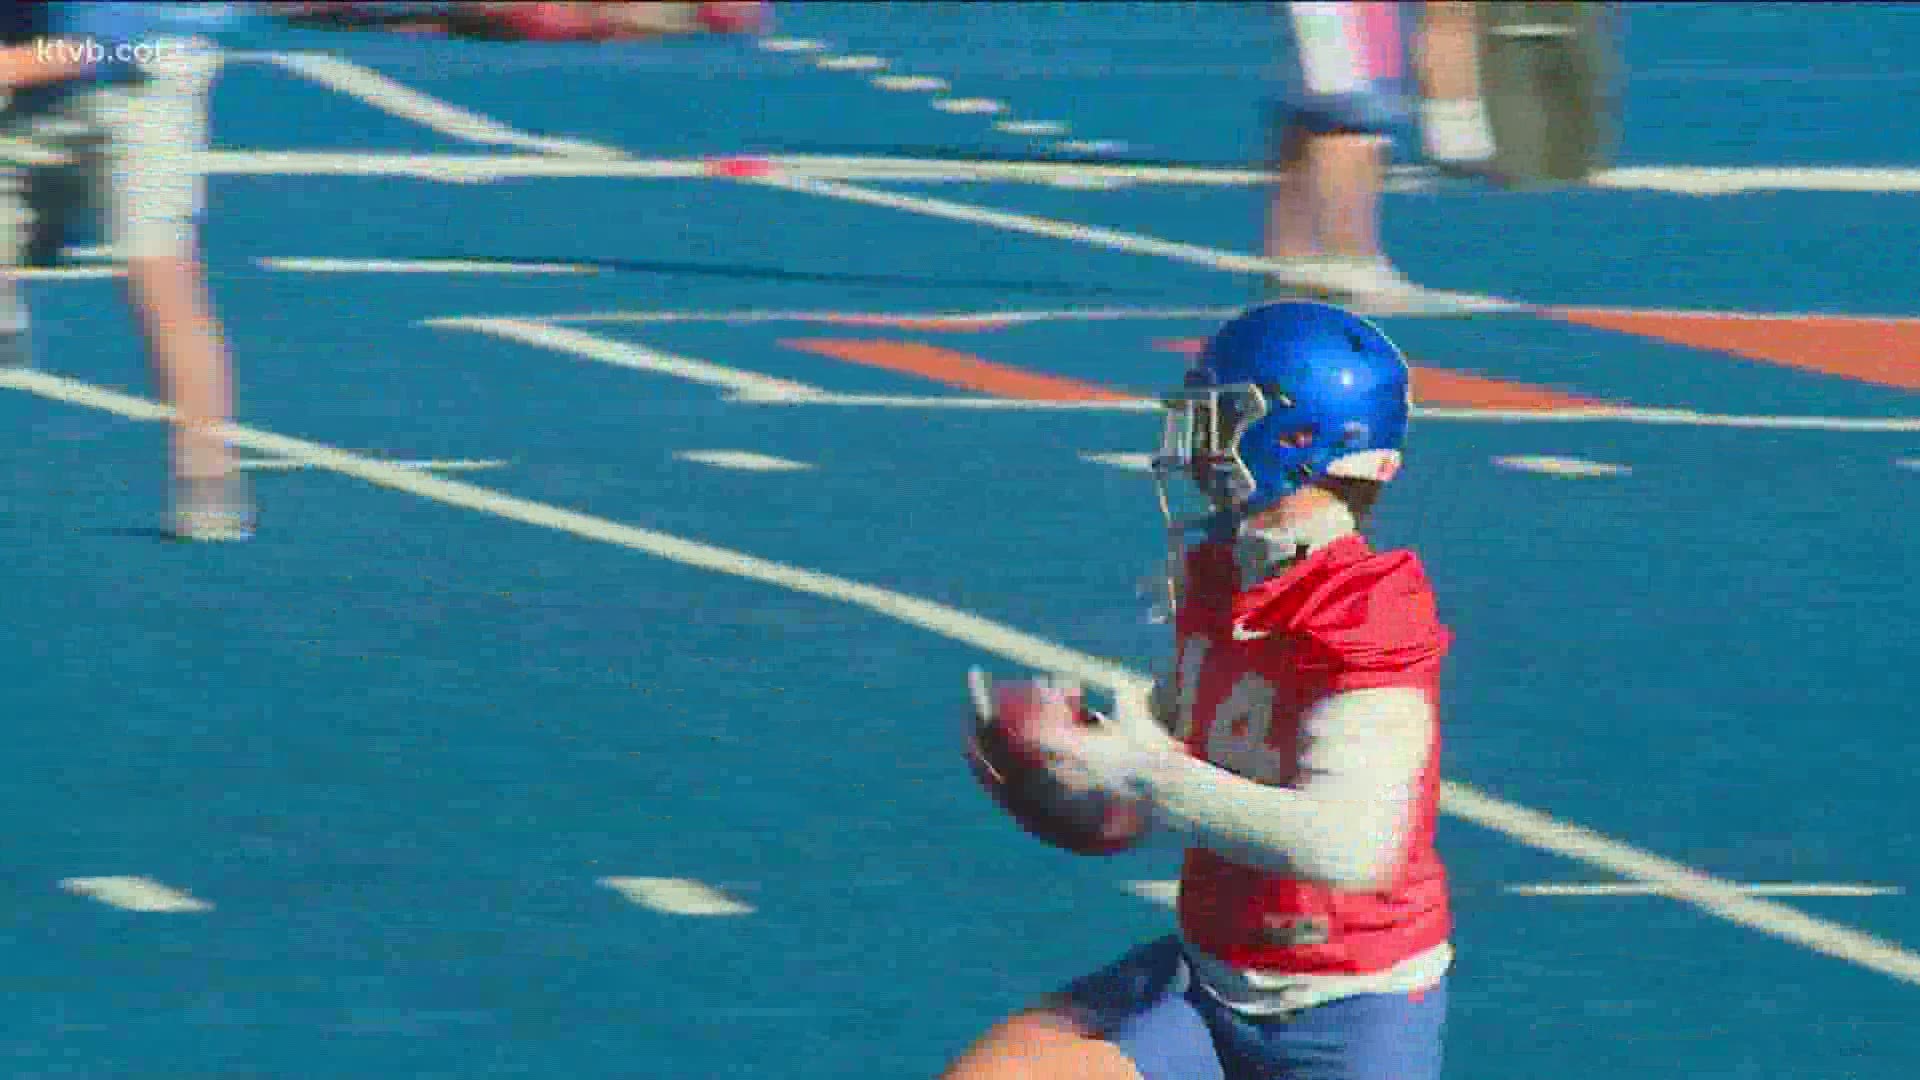 With a couple of weeks until Fall camp, two of Boise State's defensive stars were honored.